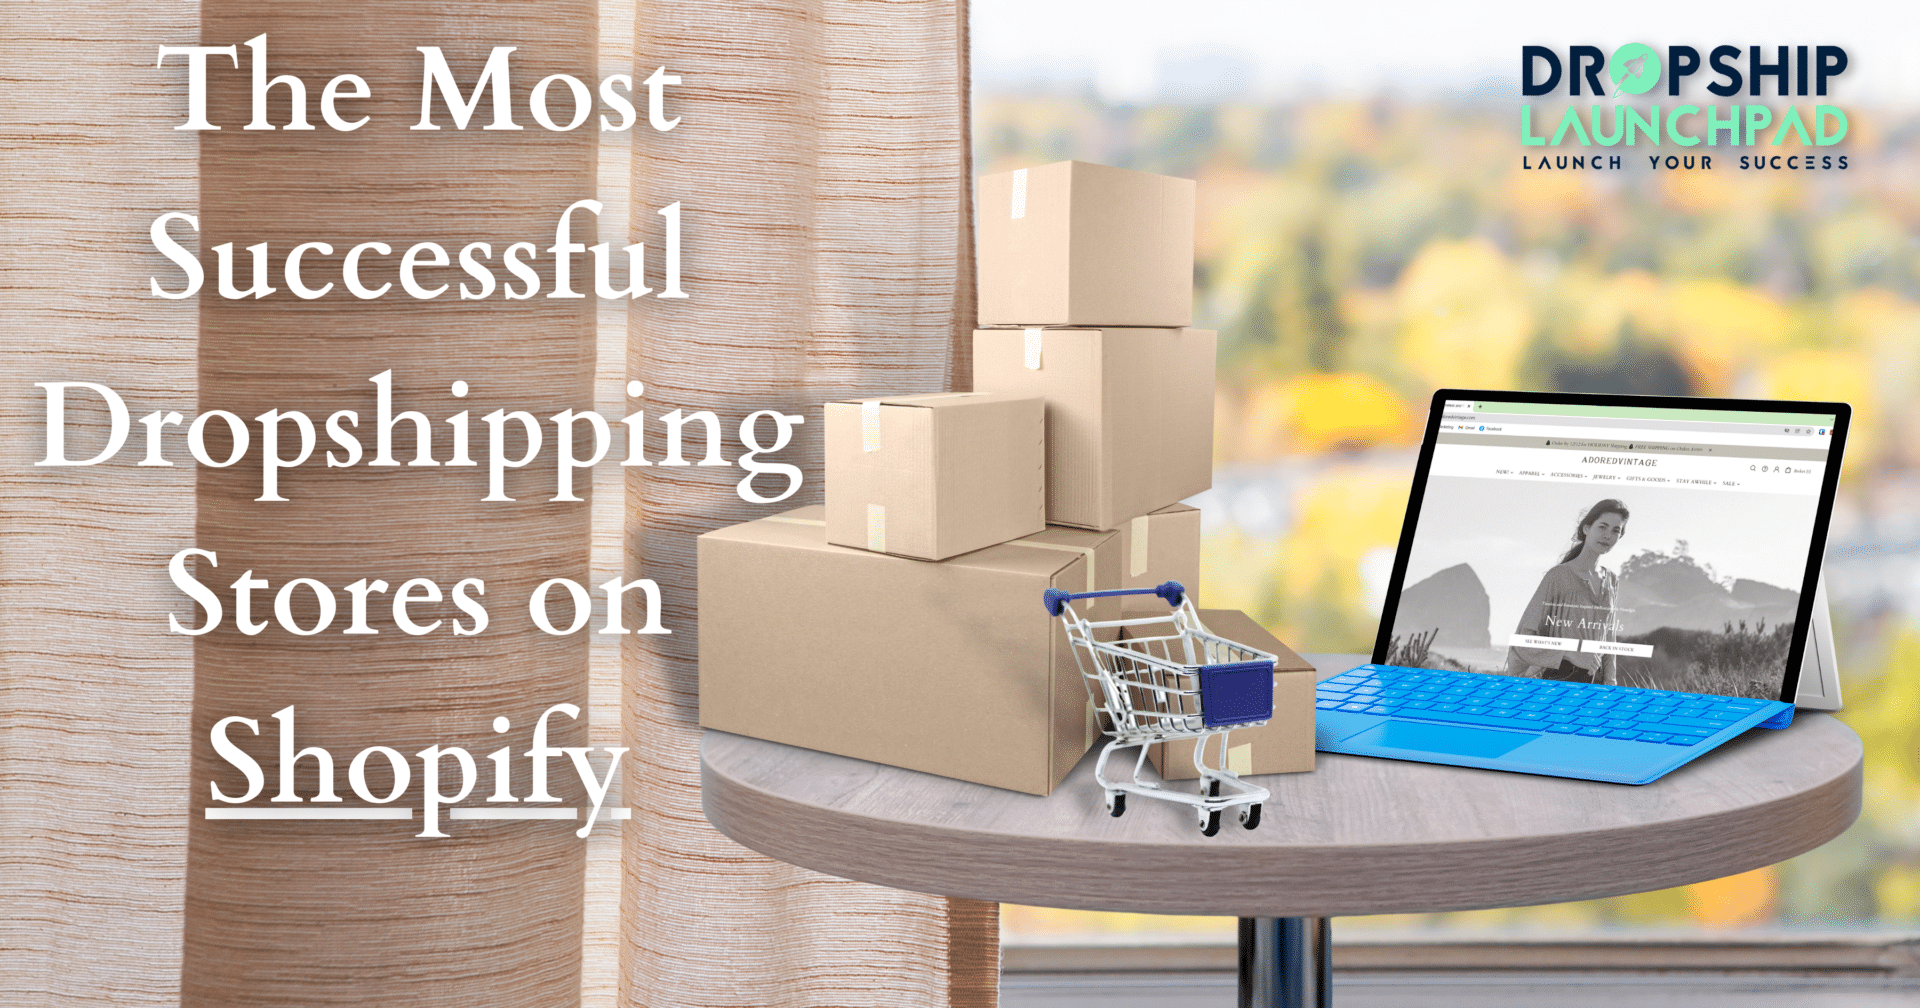 The Most Successful Dropshipping Stores on Shopify